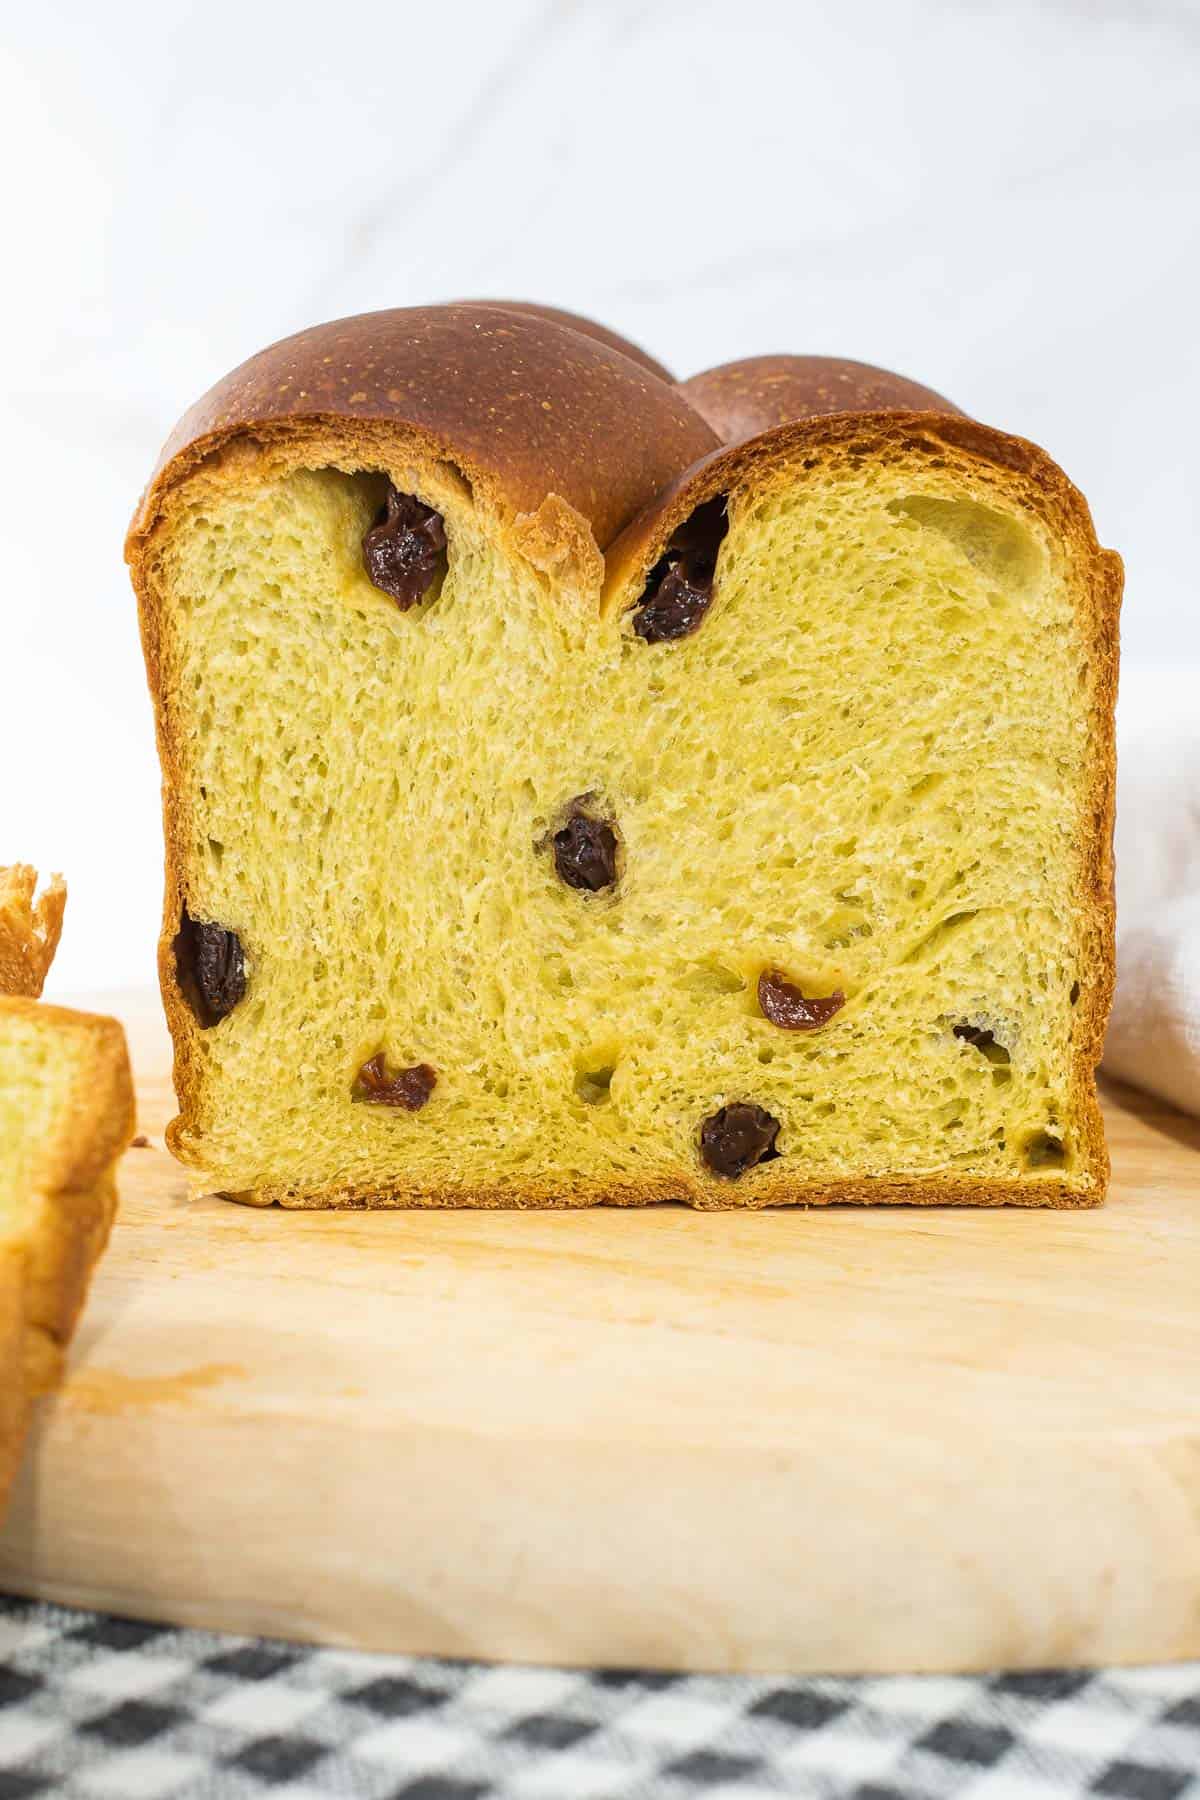 A loaf of bread with raisins.